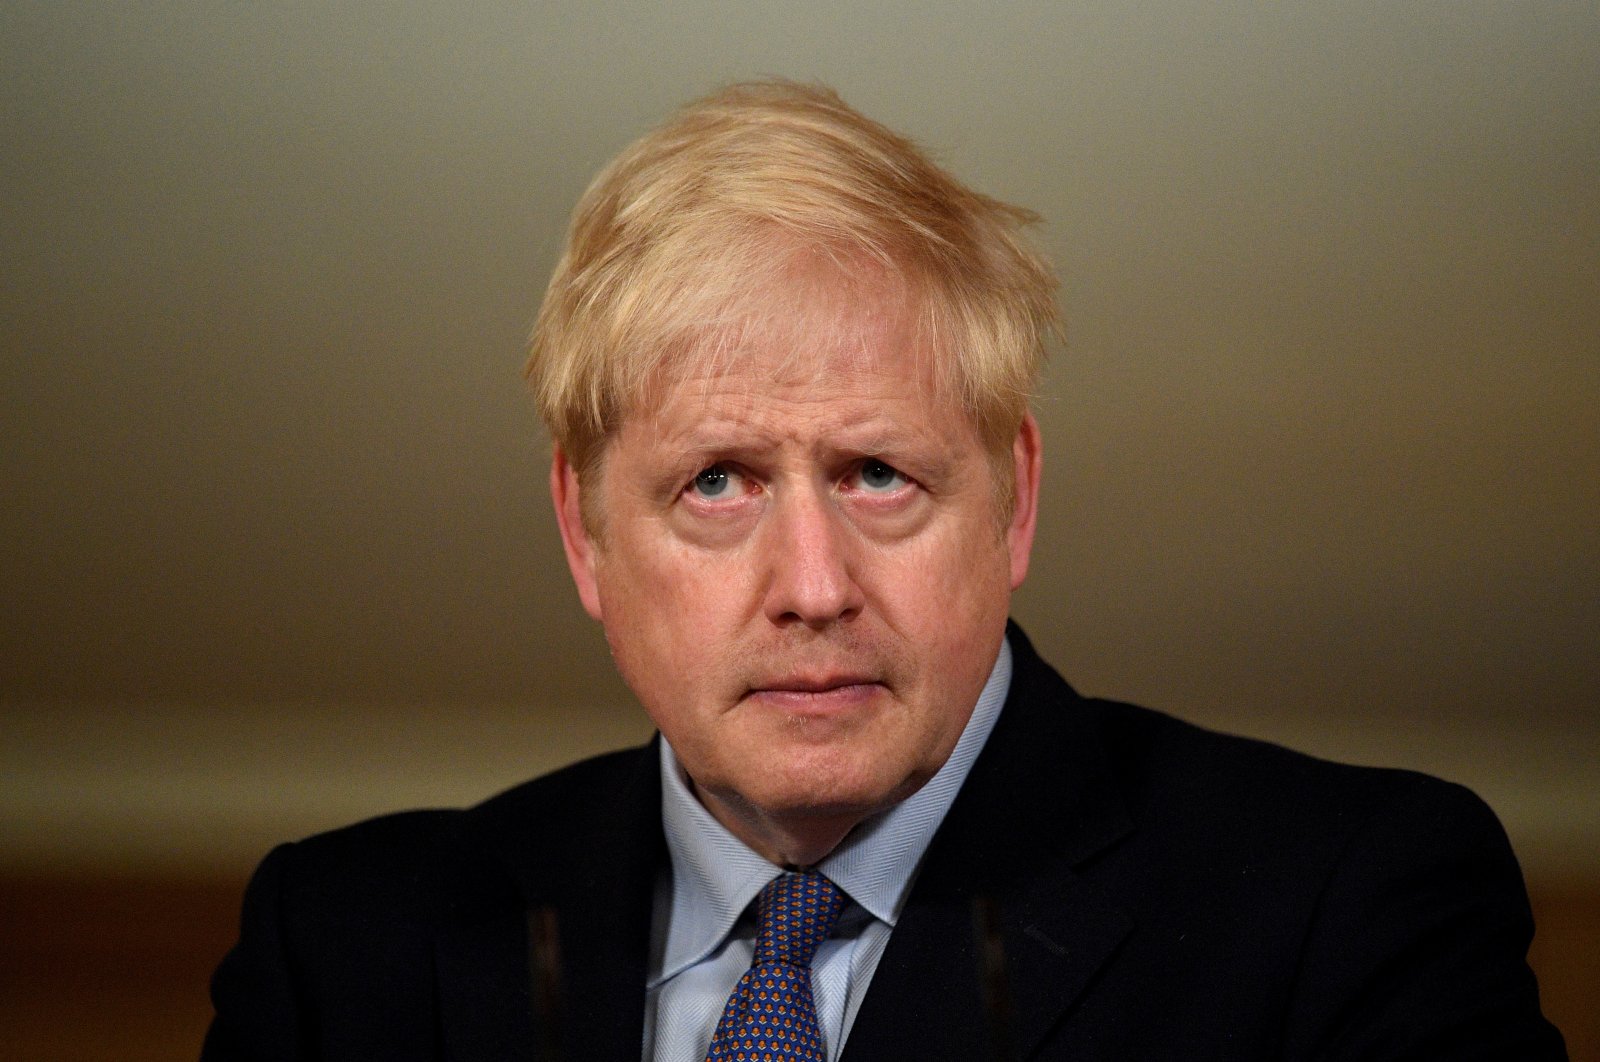 Britain's Prime Minister Boris Johnson looks on during a news conference amid the spread of COVID-19 at Downing Street in London, Britain, Oct. 20, 2020. (REUTERS Photo)